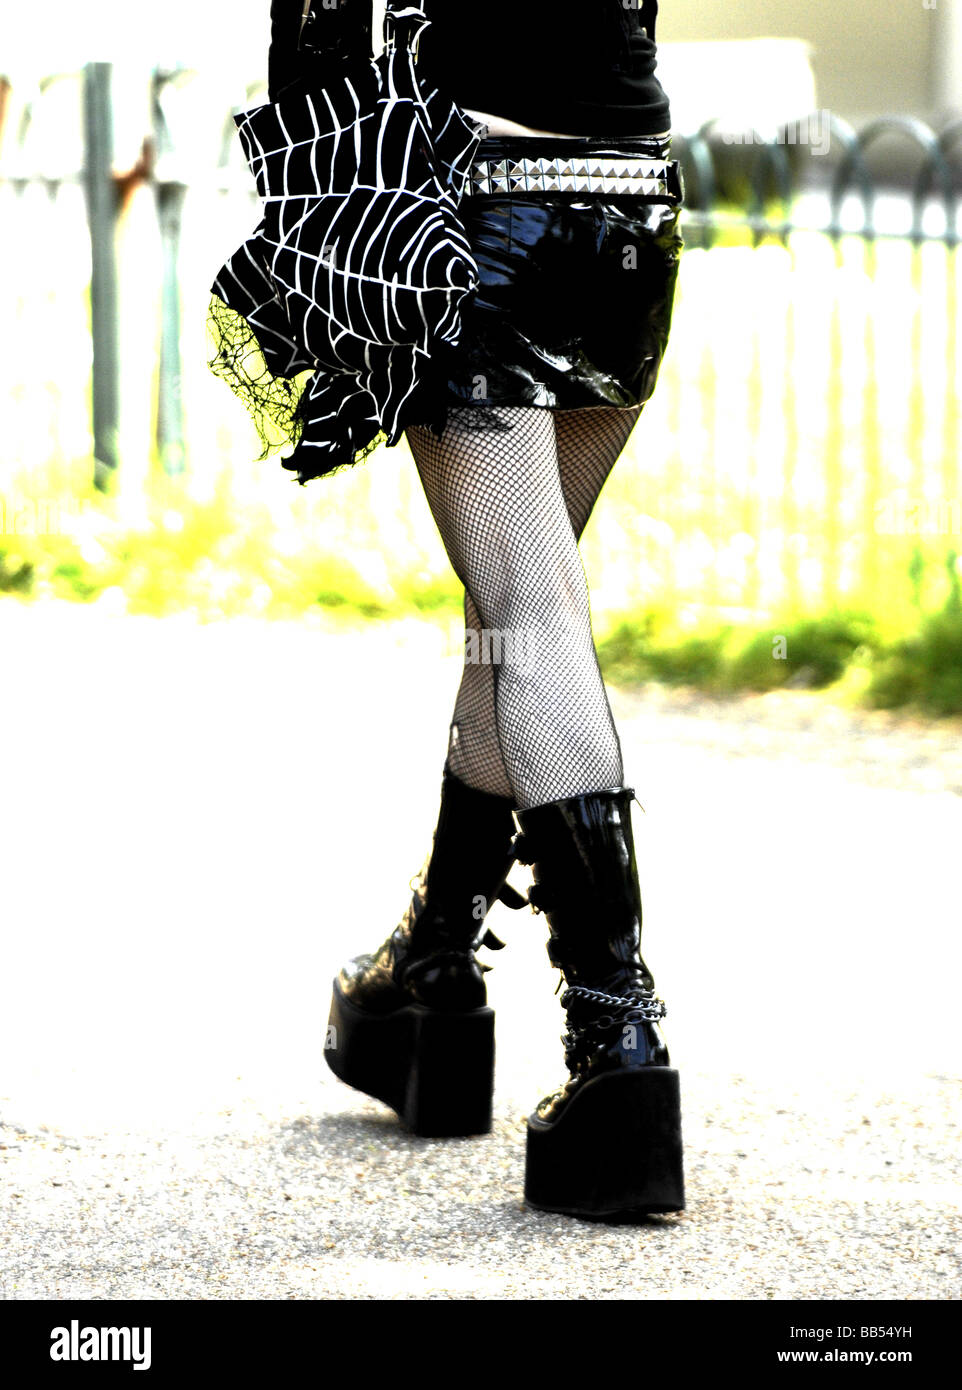 Female wearing huge platform boots and short black mini skirt with stockings Stock Photo